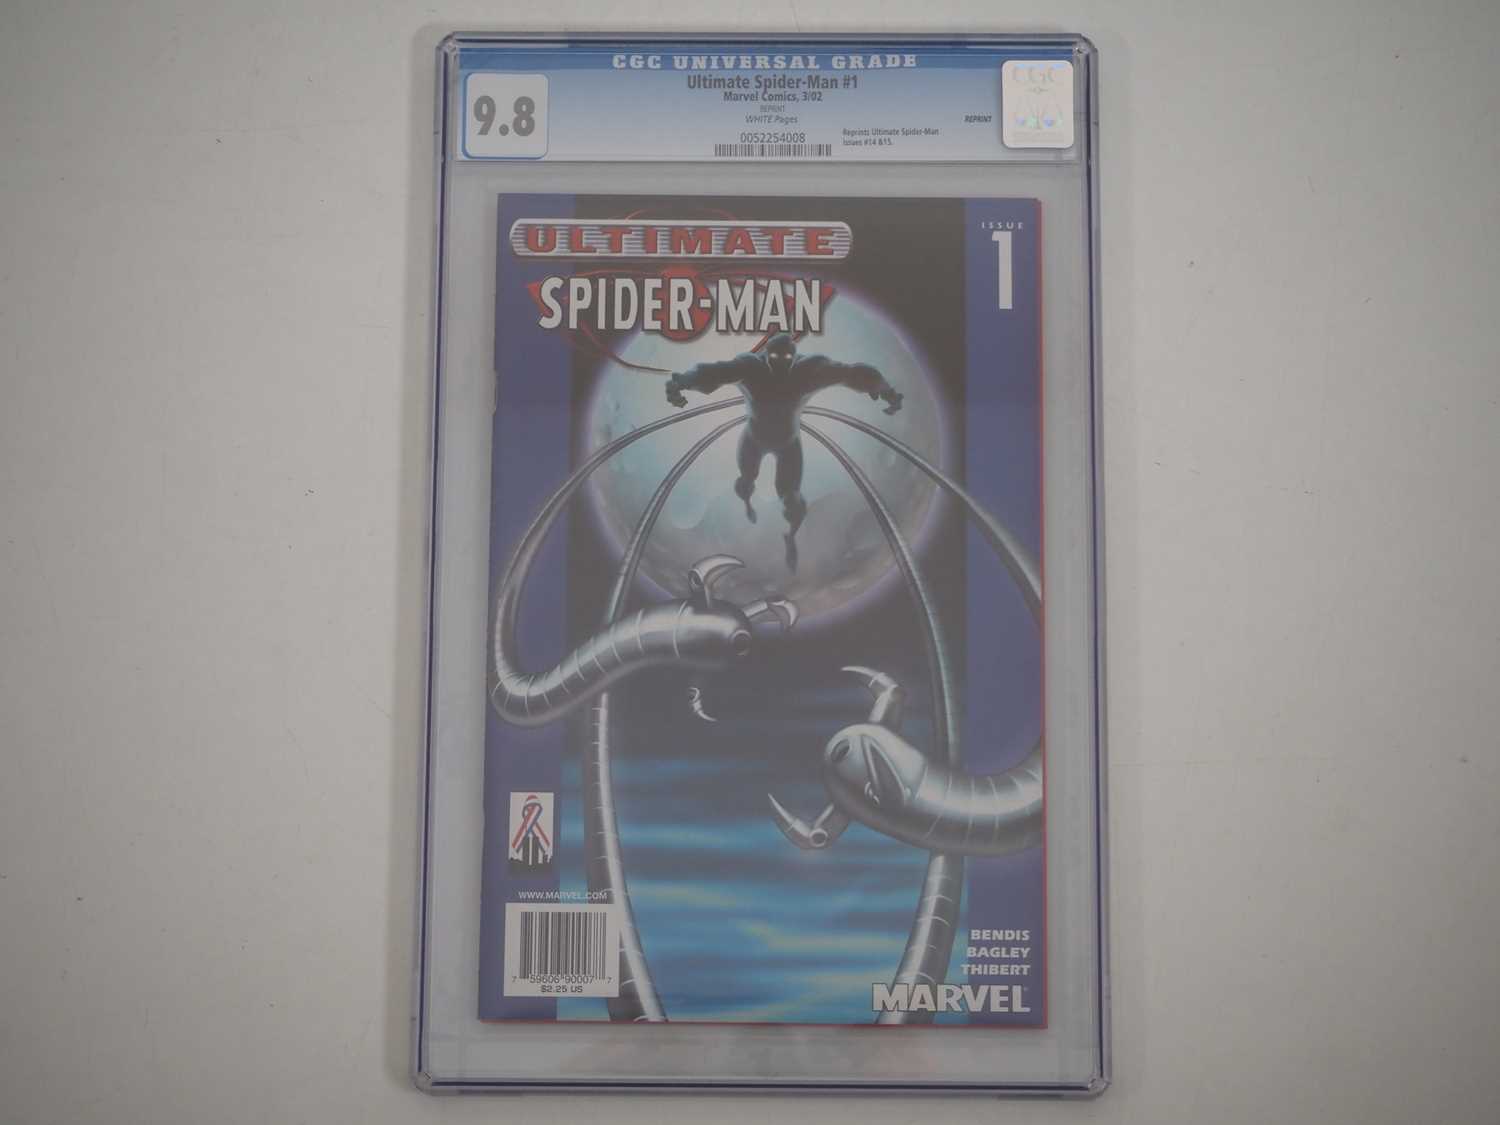 ULTIMATE SPIDER-MAN #1 VARIANT COVER REPRINT (2000 - MARVEL) - GRADED 9.8(NM/MINT) by CGC - Target